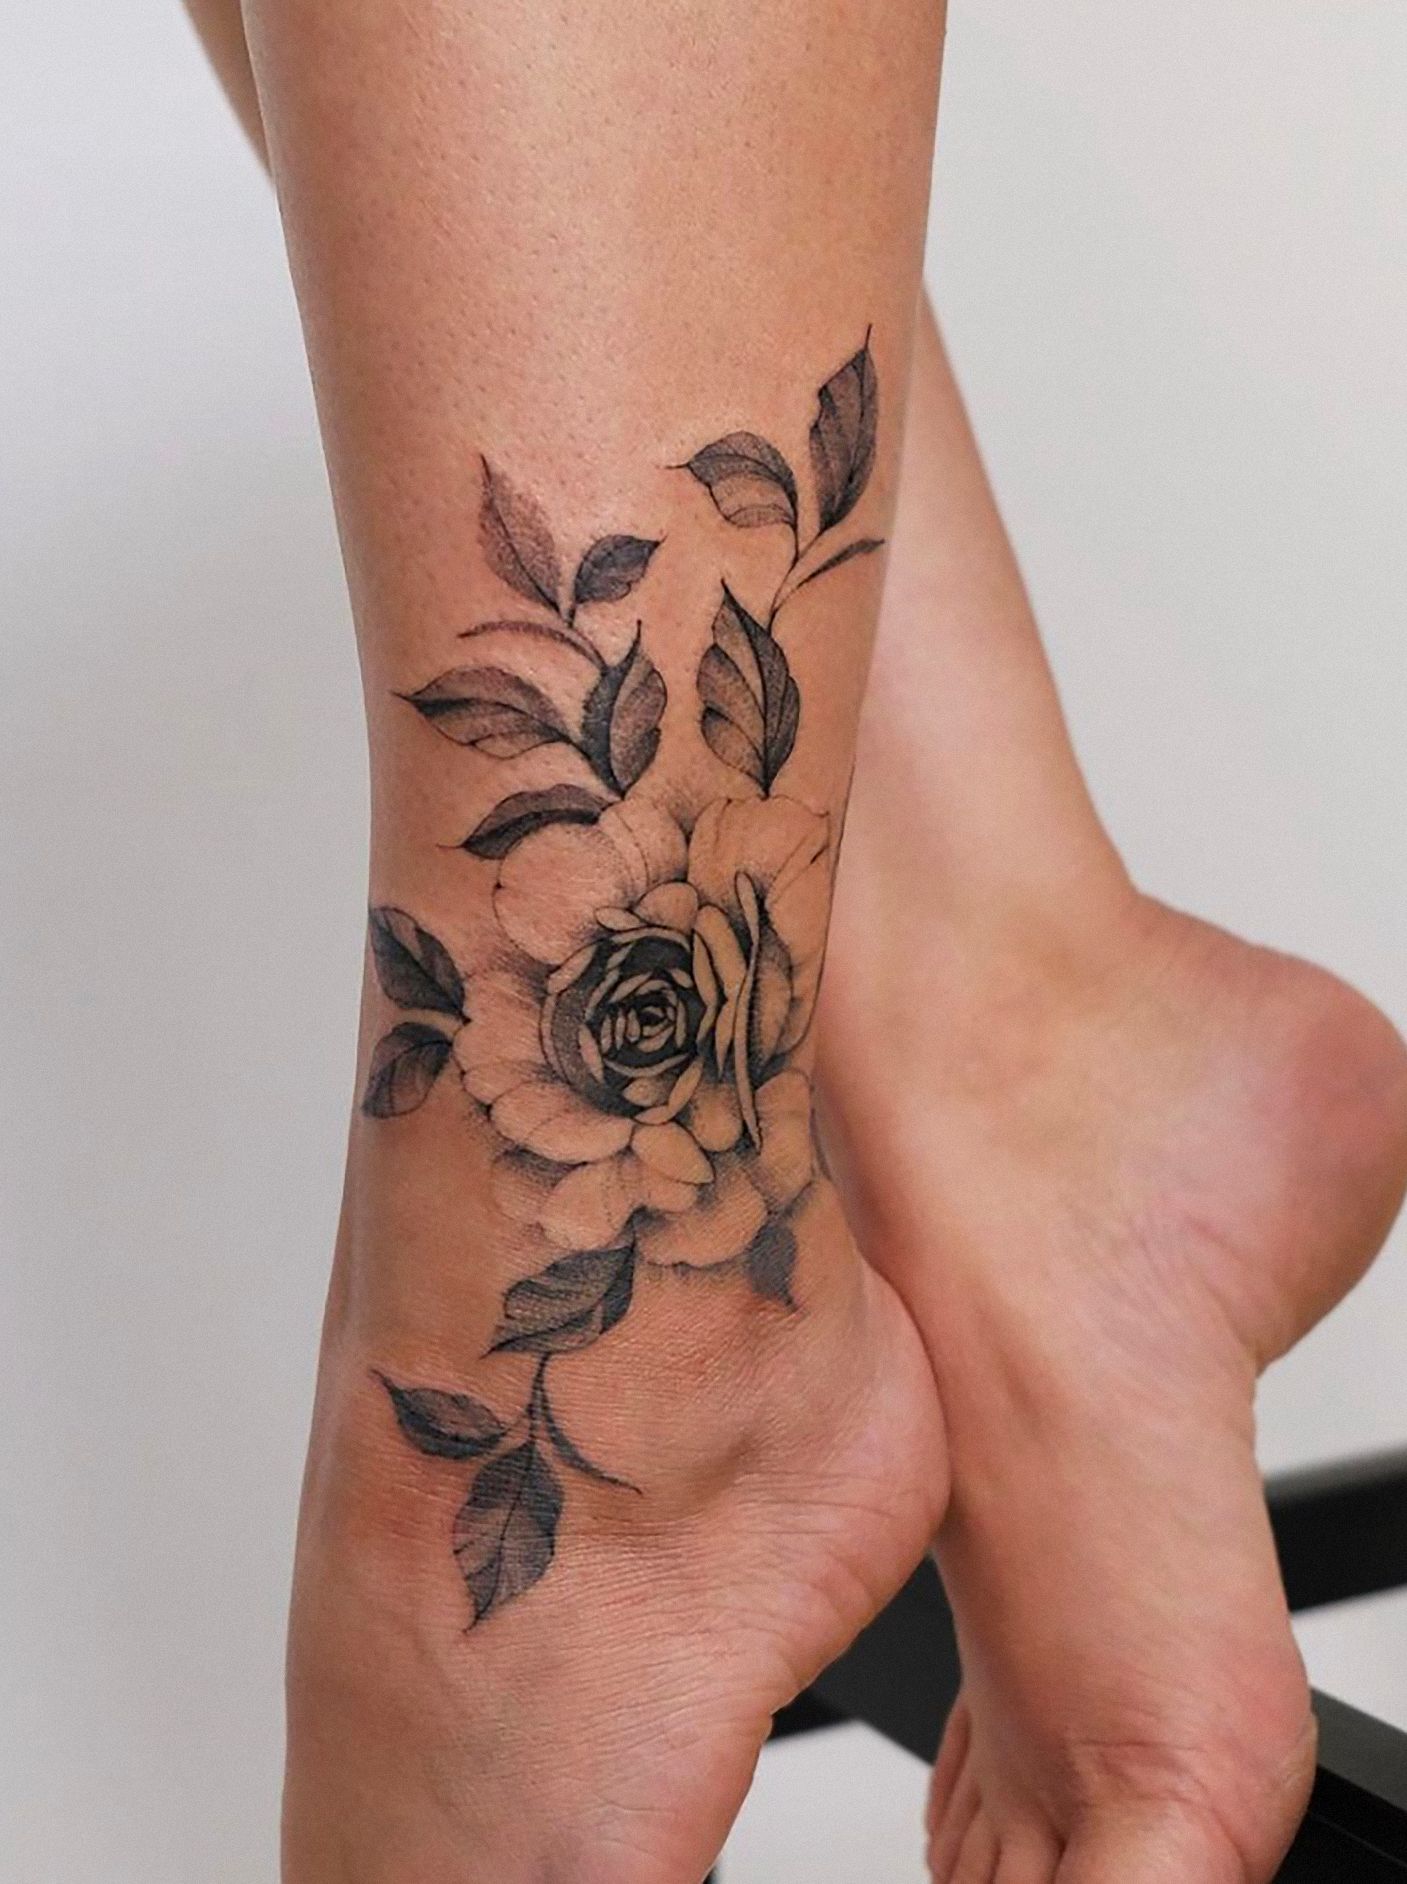 Ankle Tattoo Design Ideas Images | Ankle tattoo men, Wrap around ankle  tattoos, Bird ankle tattoo